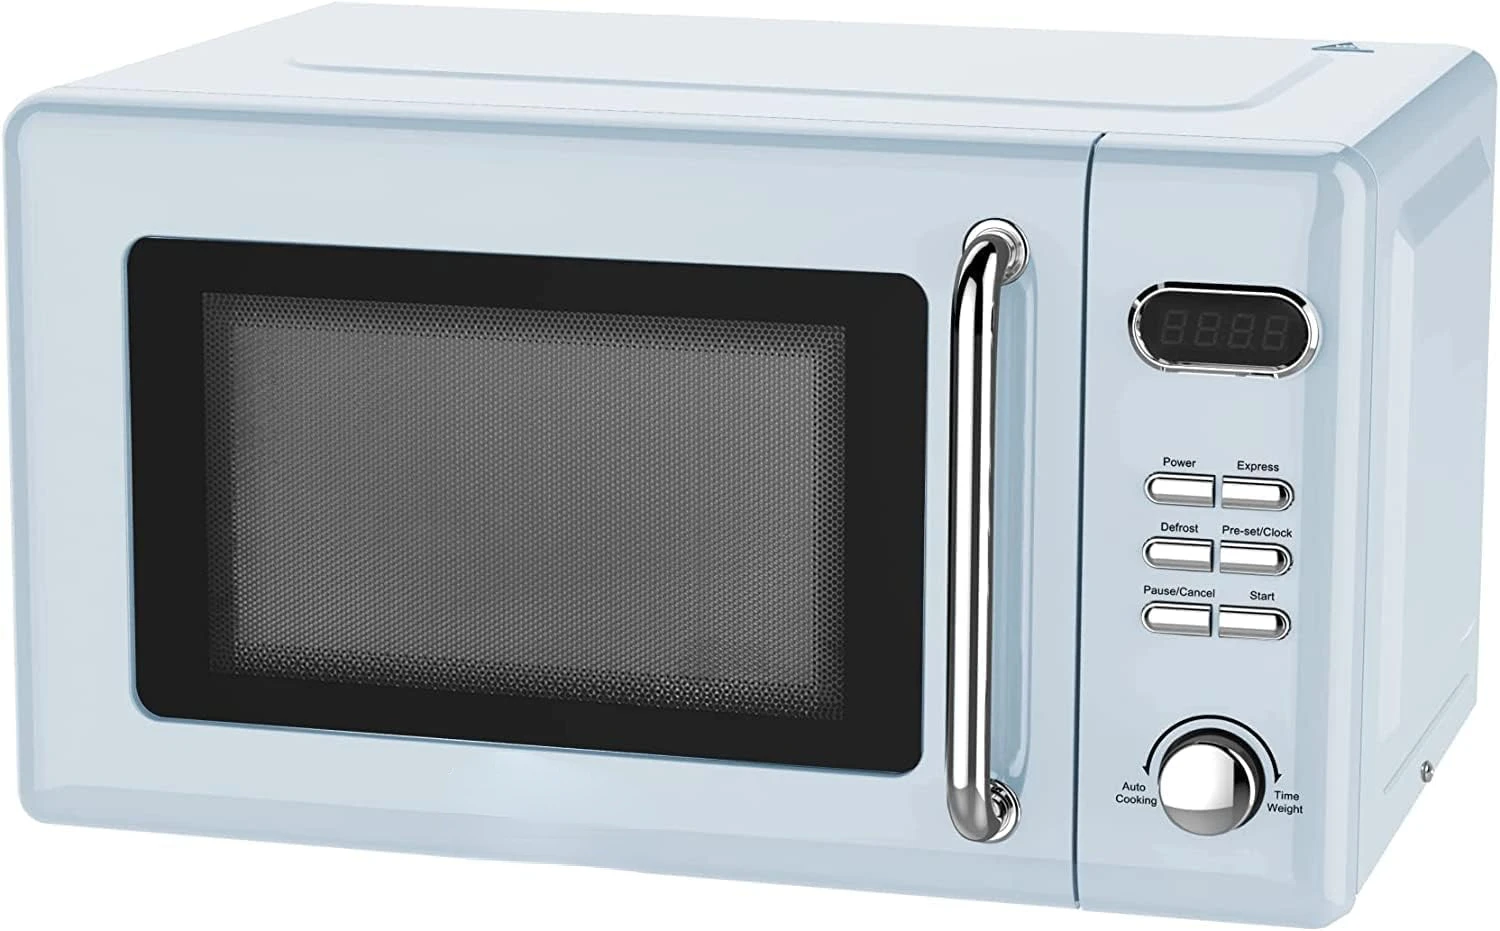 

Cu Ft Retro Digital Microwave Oven, 700W with 5 Micro Power Levels, 8 Pre-Programmed Settings, Express & Defrost, Chrome Han Mic